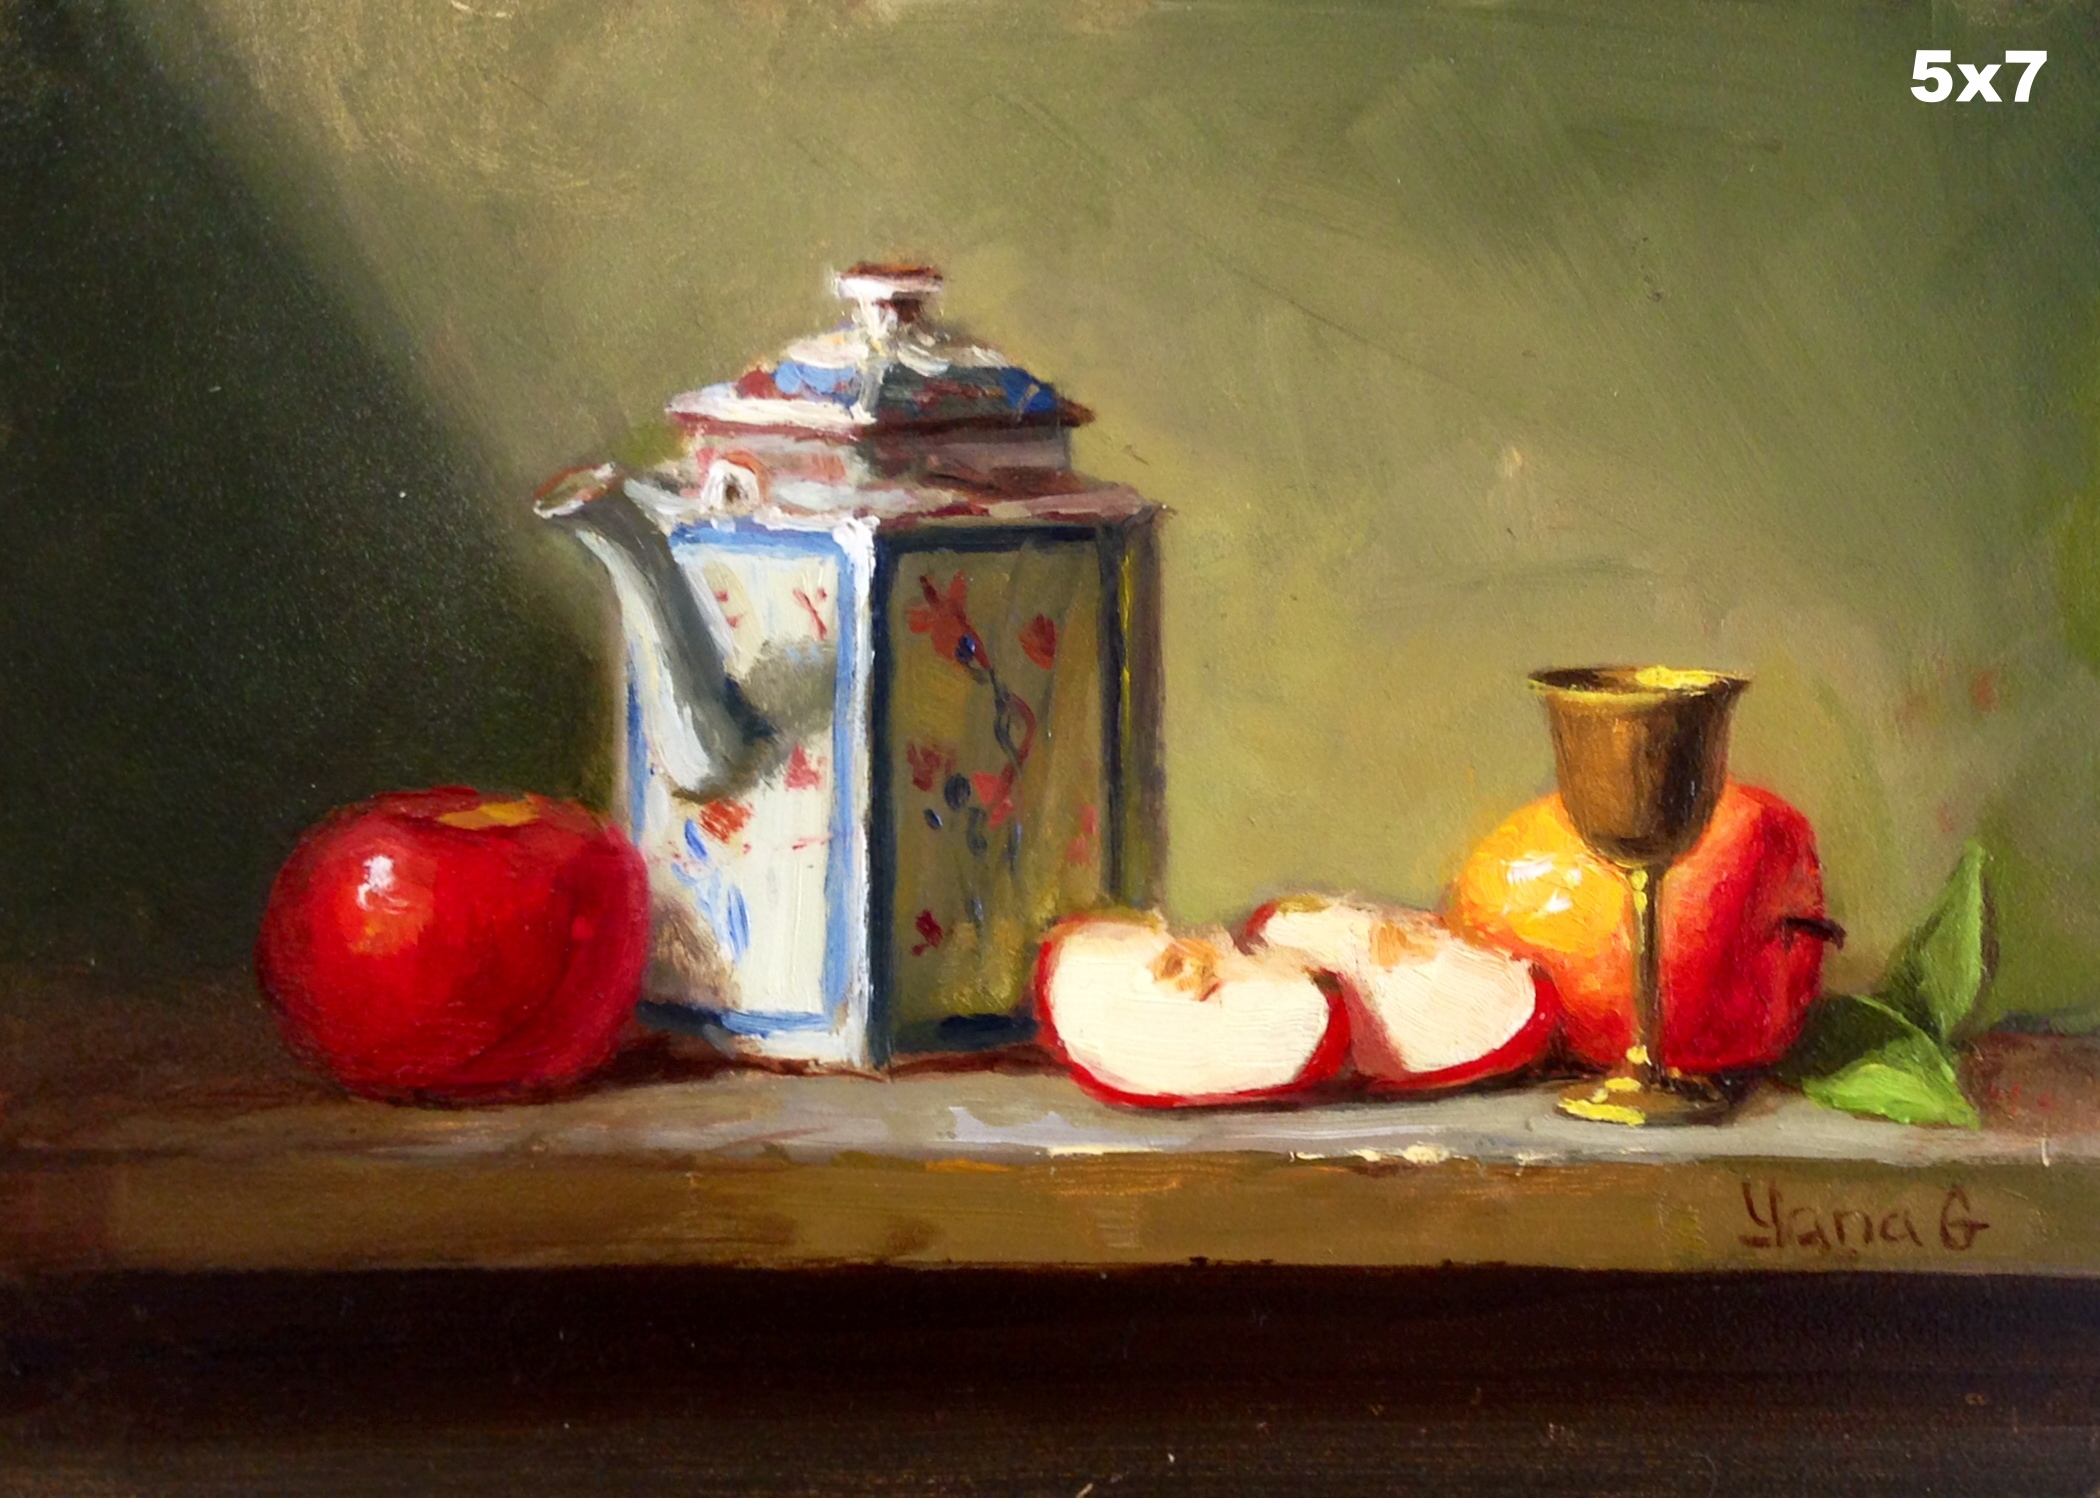 Tea pot and apples 5x7 Oil on board